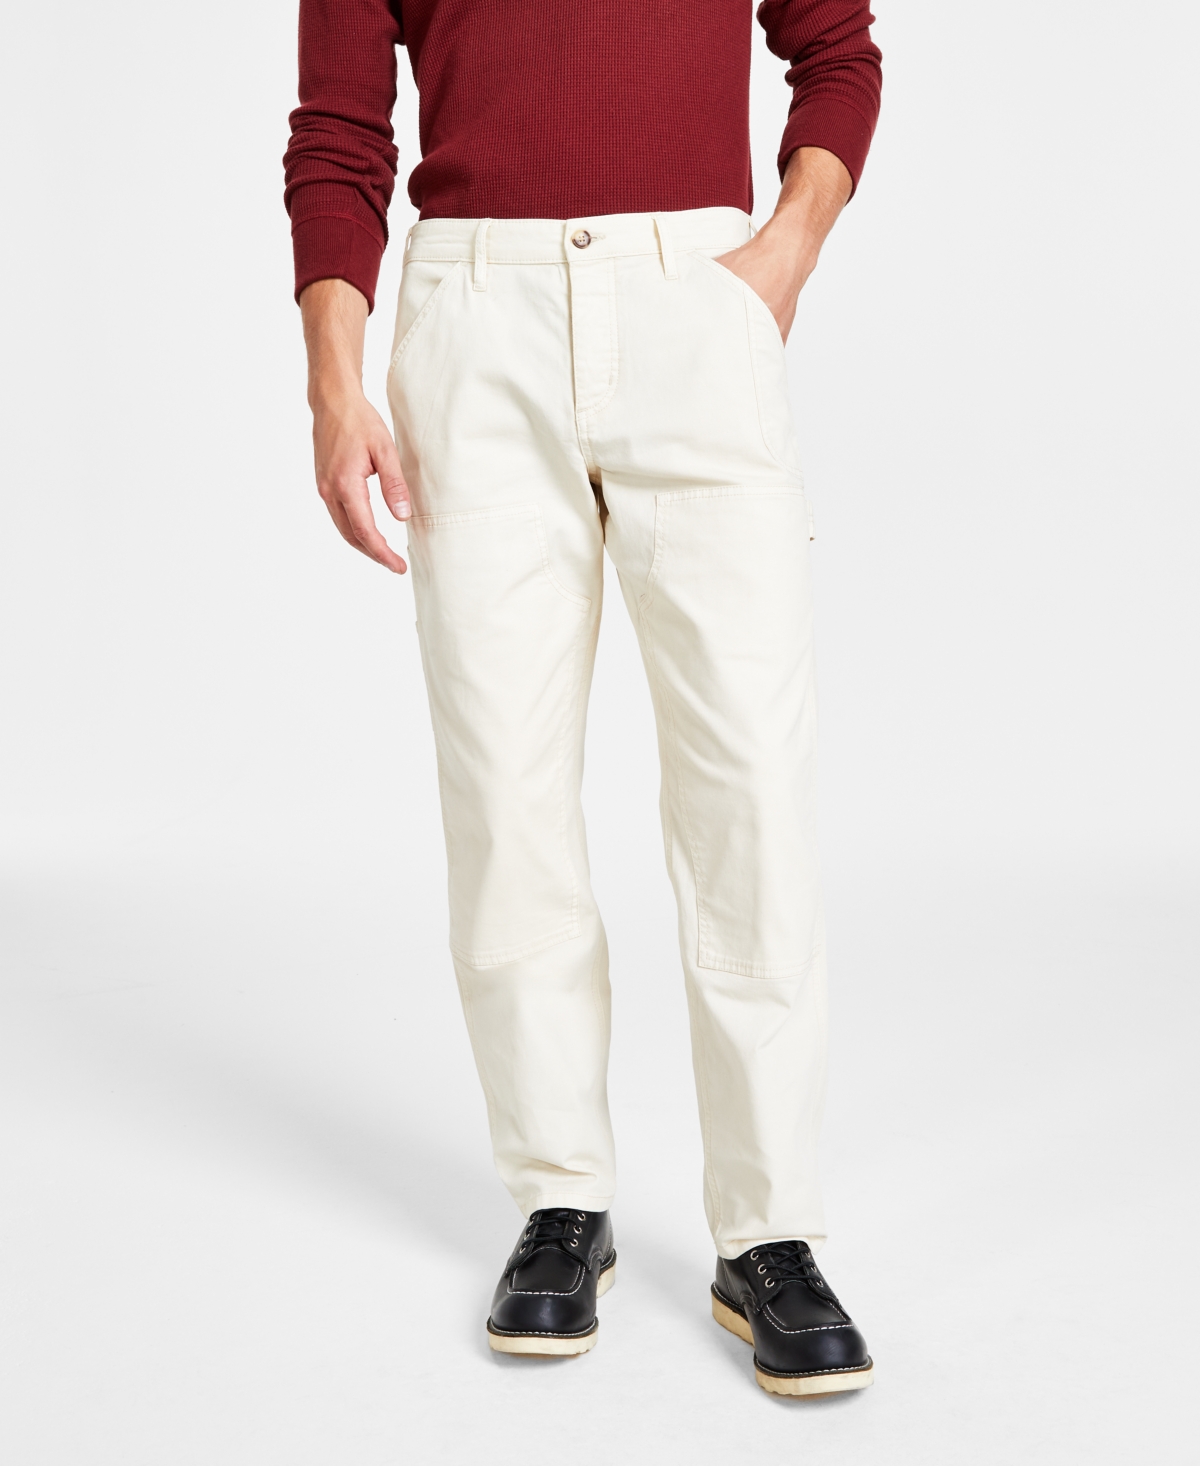 Men's Workwear Straight-Fit Garment-Dyed Tapered Carpenter Pants, Created for Macy's - Ecru